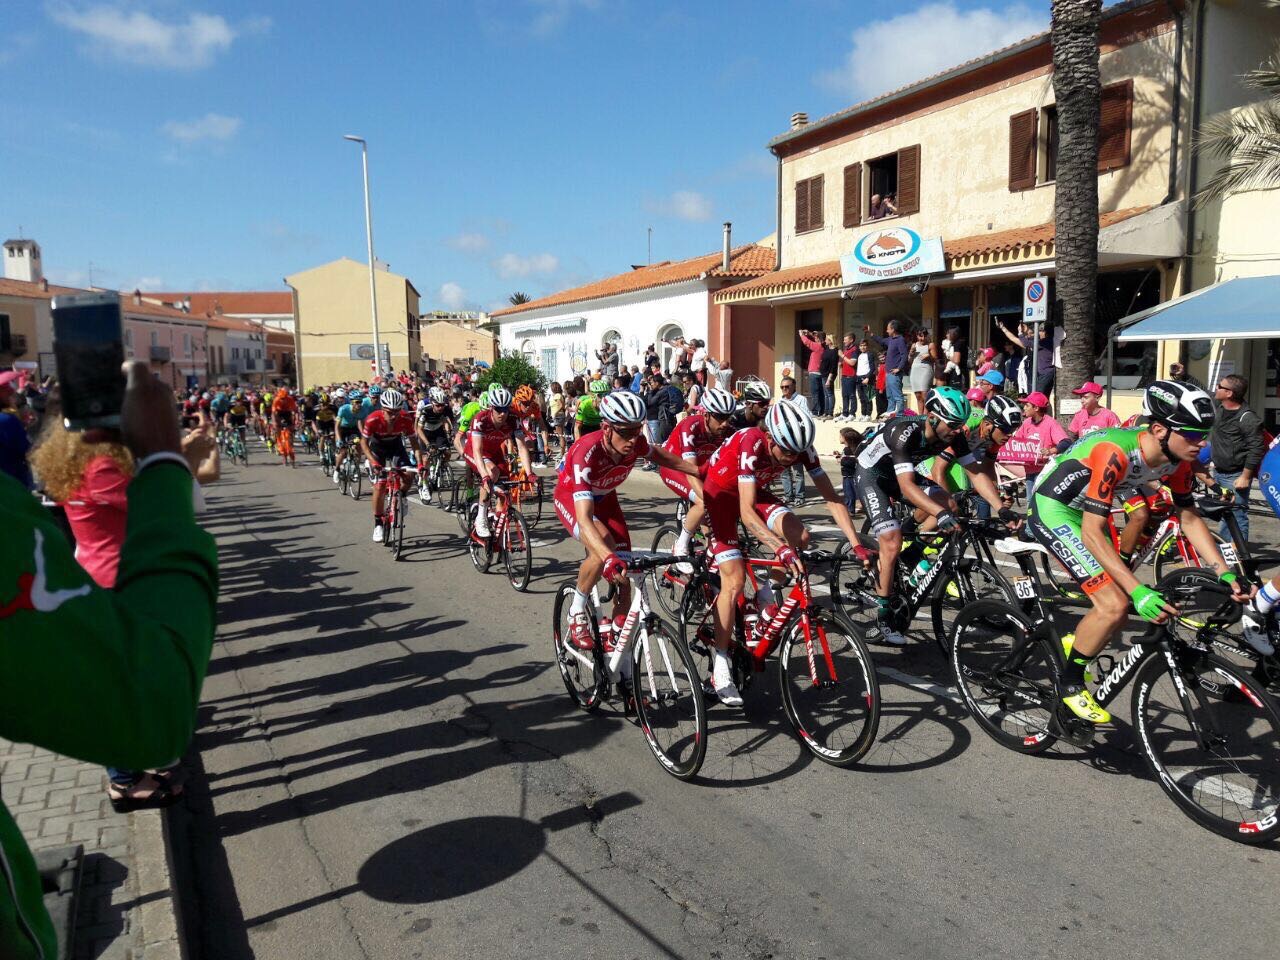 images of Giro d’Italia cyclists near our villas in Sardinia